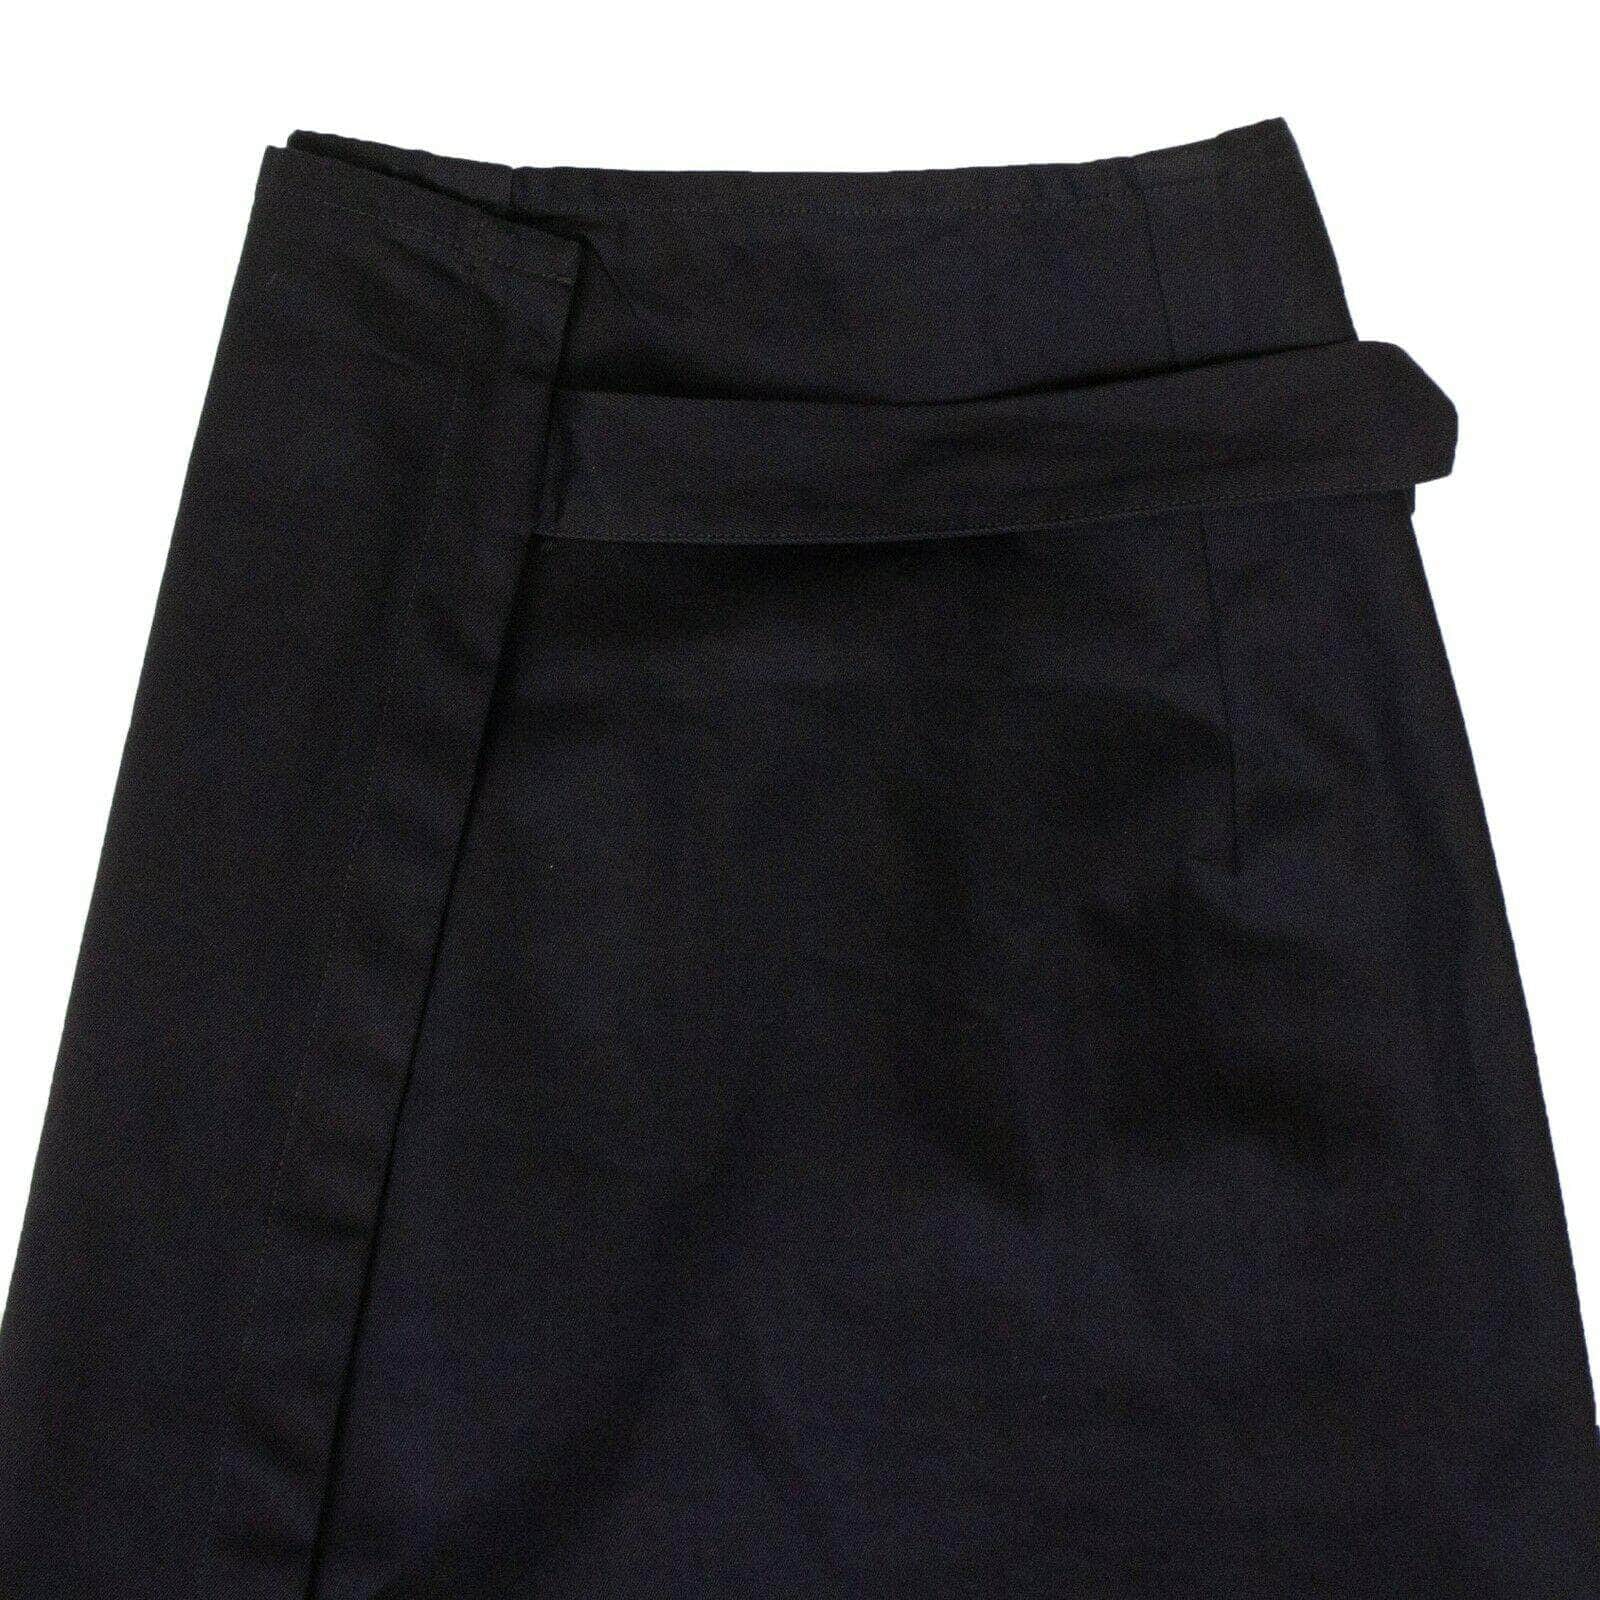 A_Plan_Application a_plan_application, channelenable-all, chicmi, couponcollection, gender-womens, july4th, main-clothing, size-s, under-250, womens-a-line-skirts S Women's Black High Waisted Wrap Midi Skirt 82NGG-AP-3/S 82NGG-AP-3/S